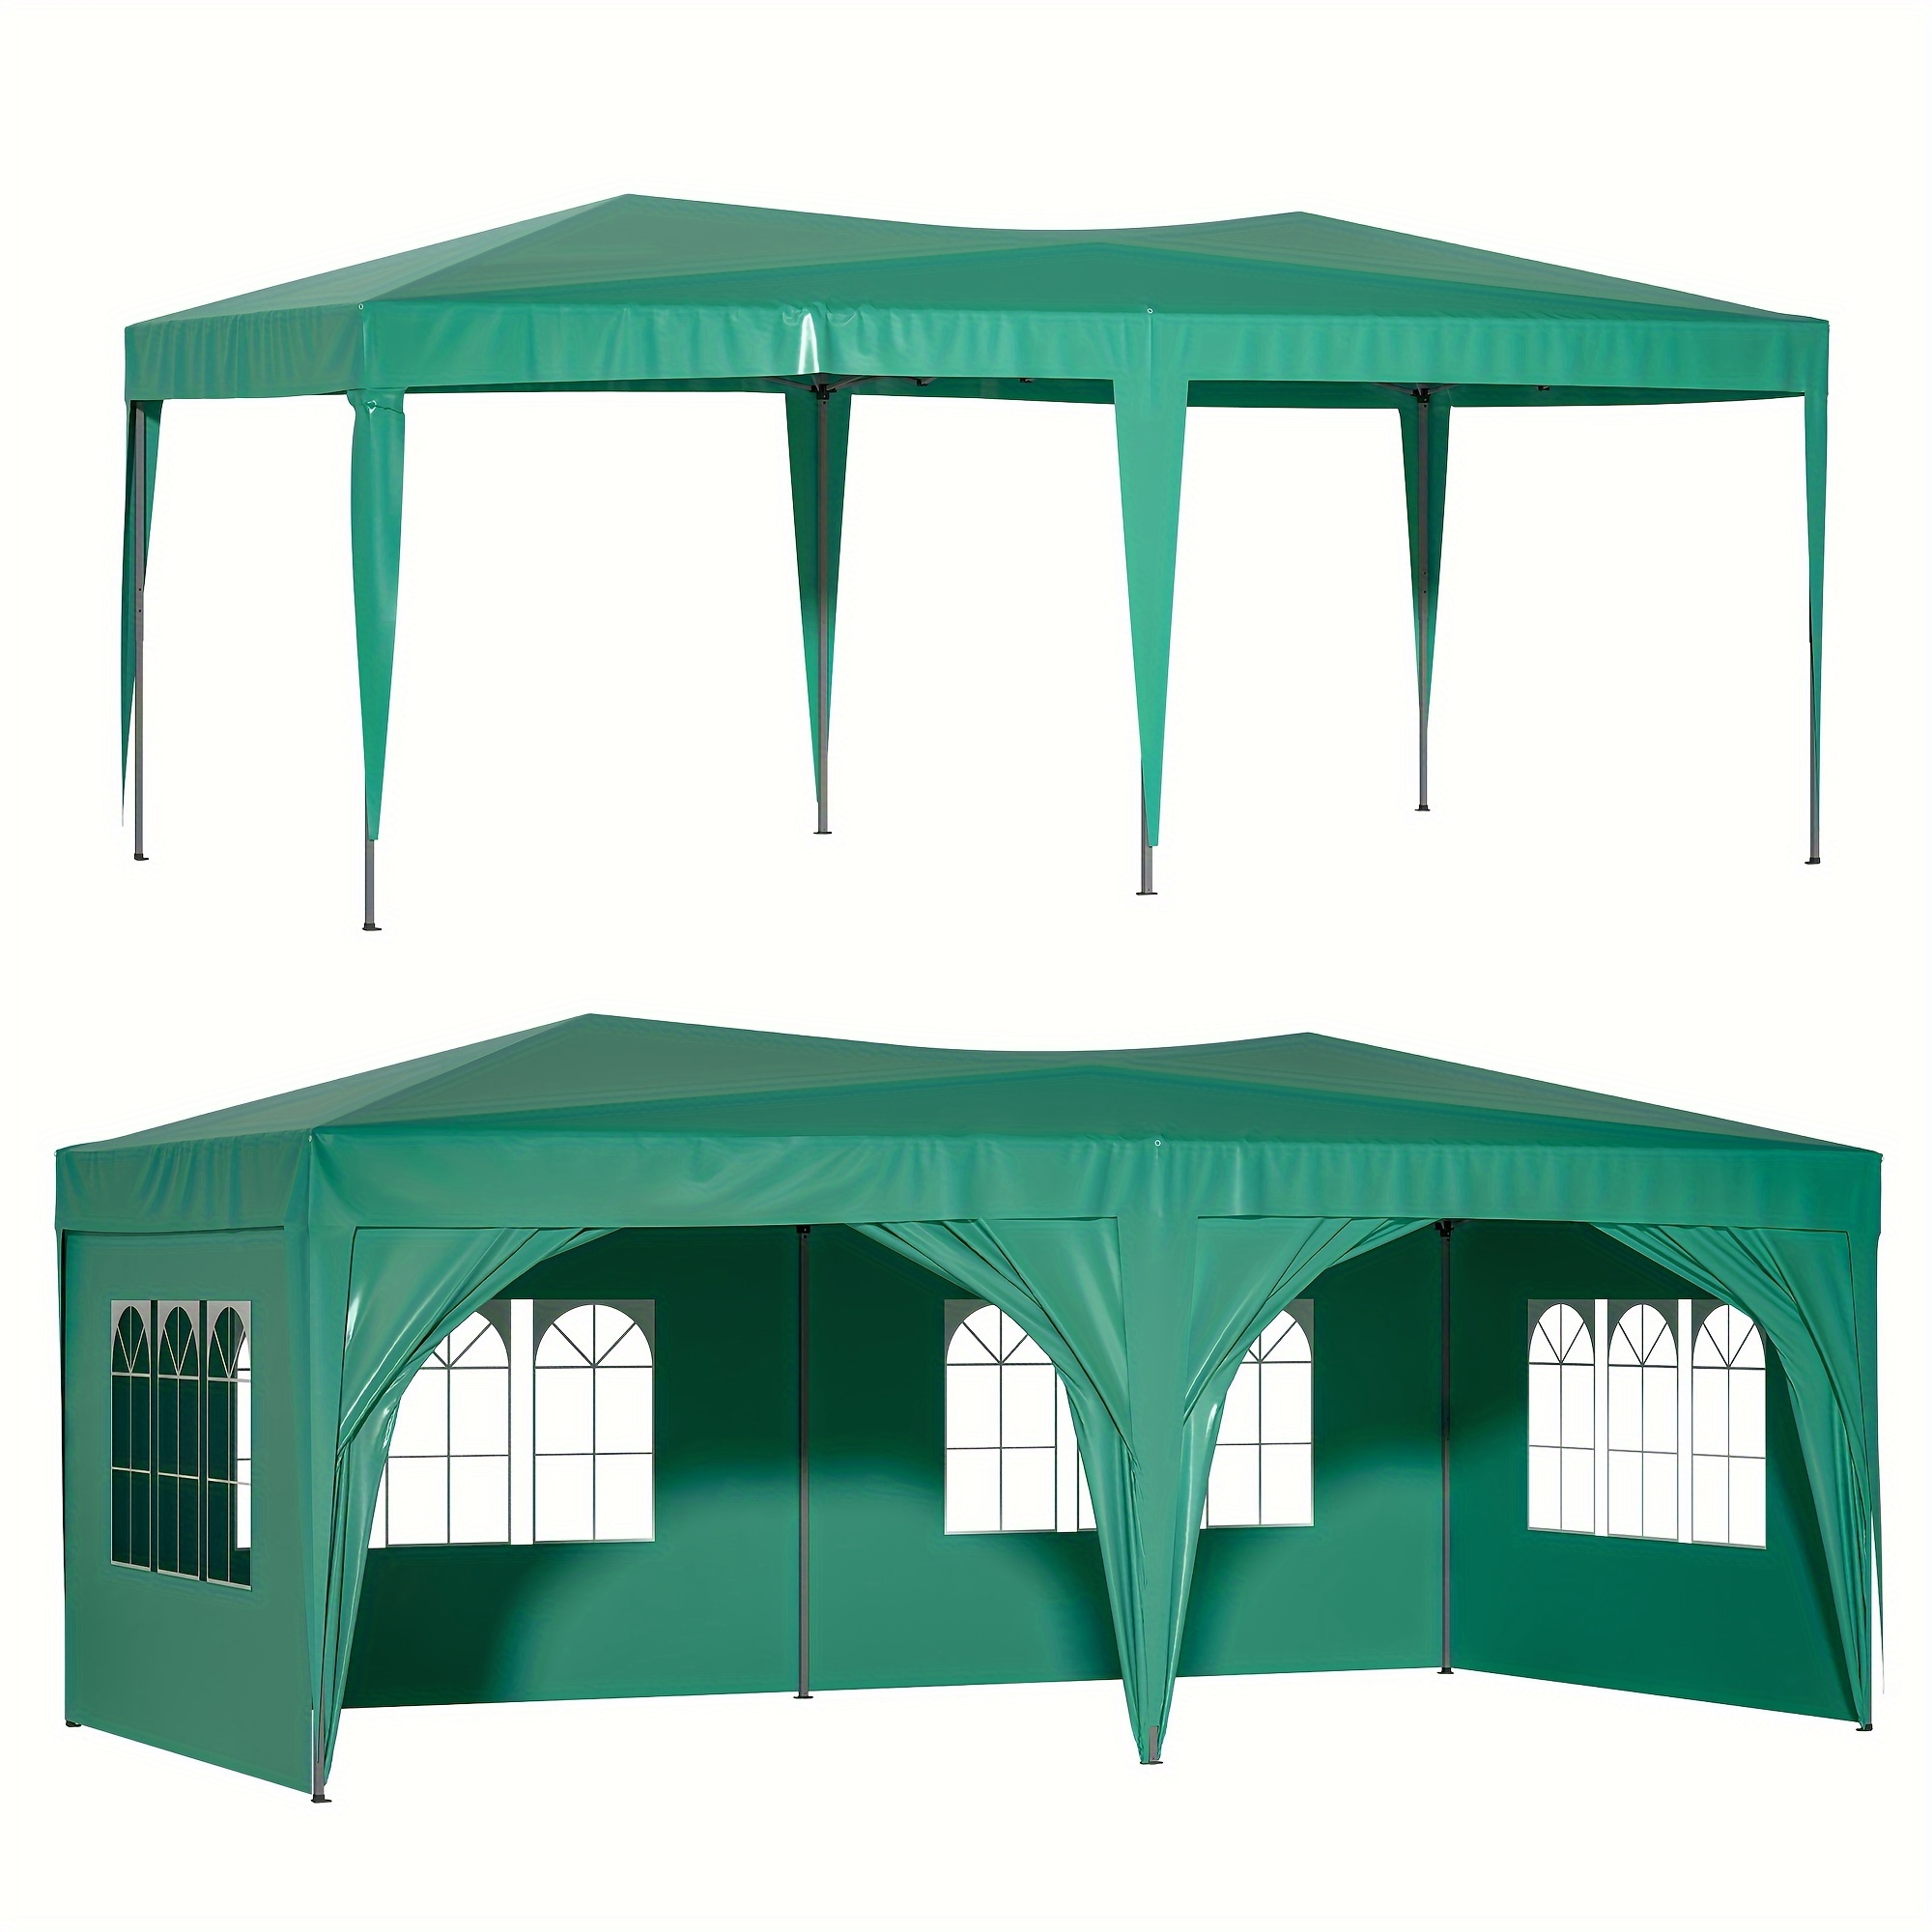 

10'x20' Ez Pop Up Canopy Outdoor Portable Party Folding Tent With 6 Removable Sidewalls + Carry Bag + 6pcs Weight Bag